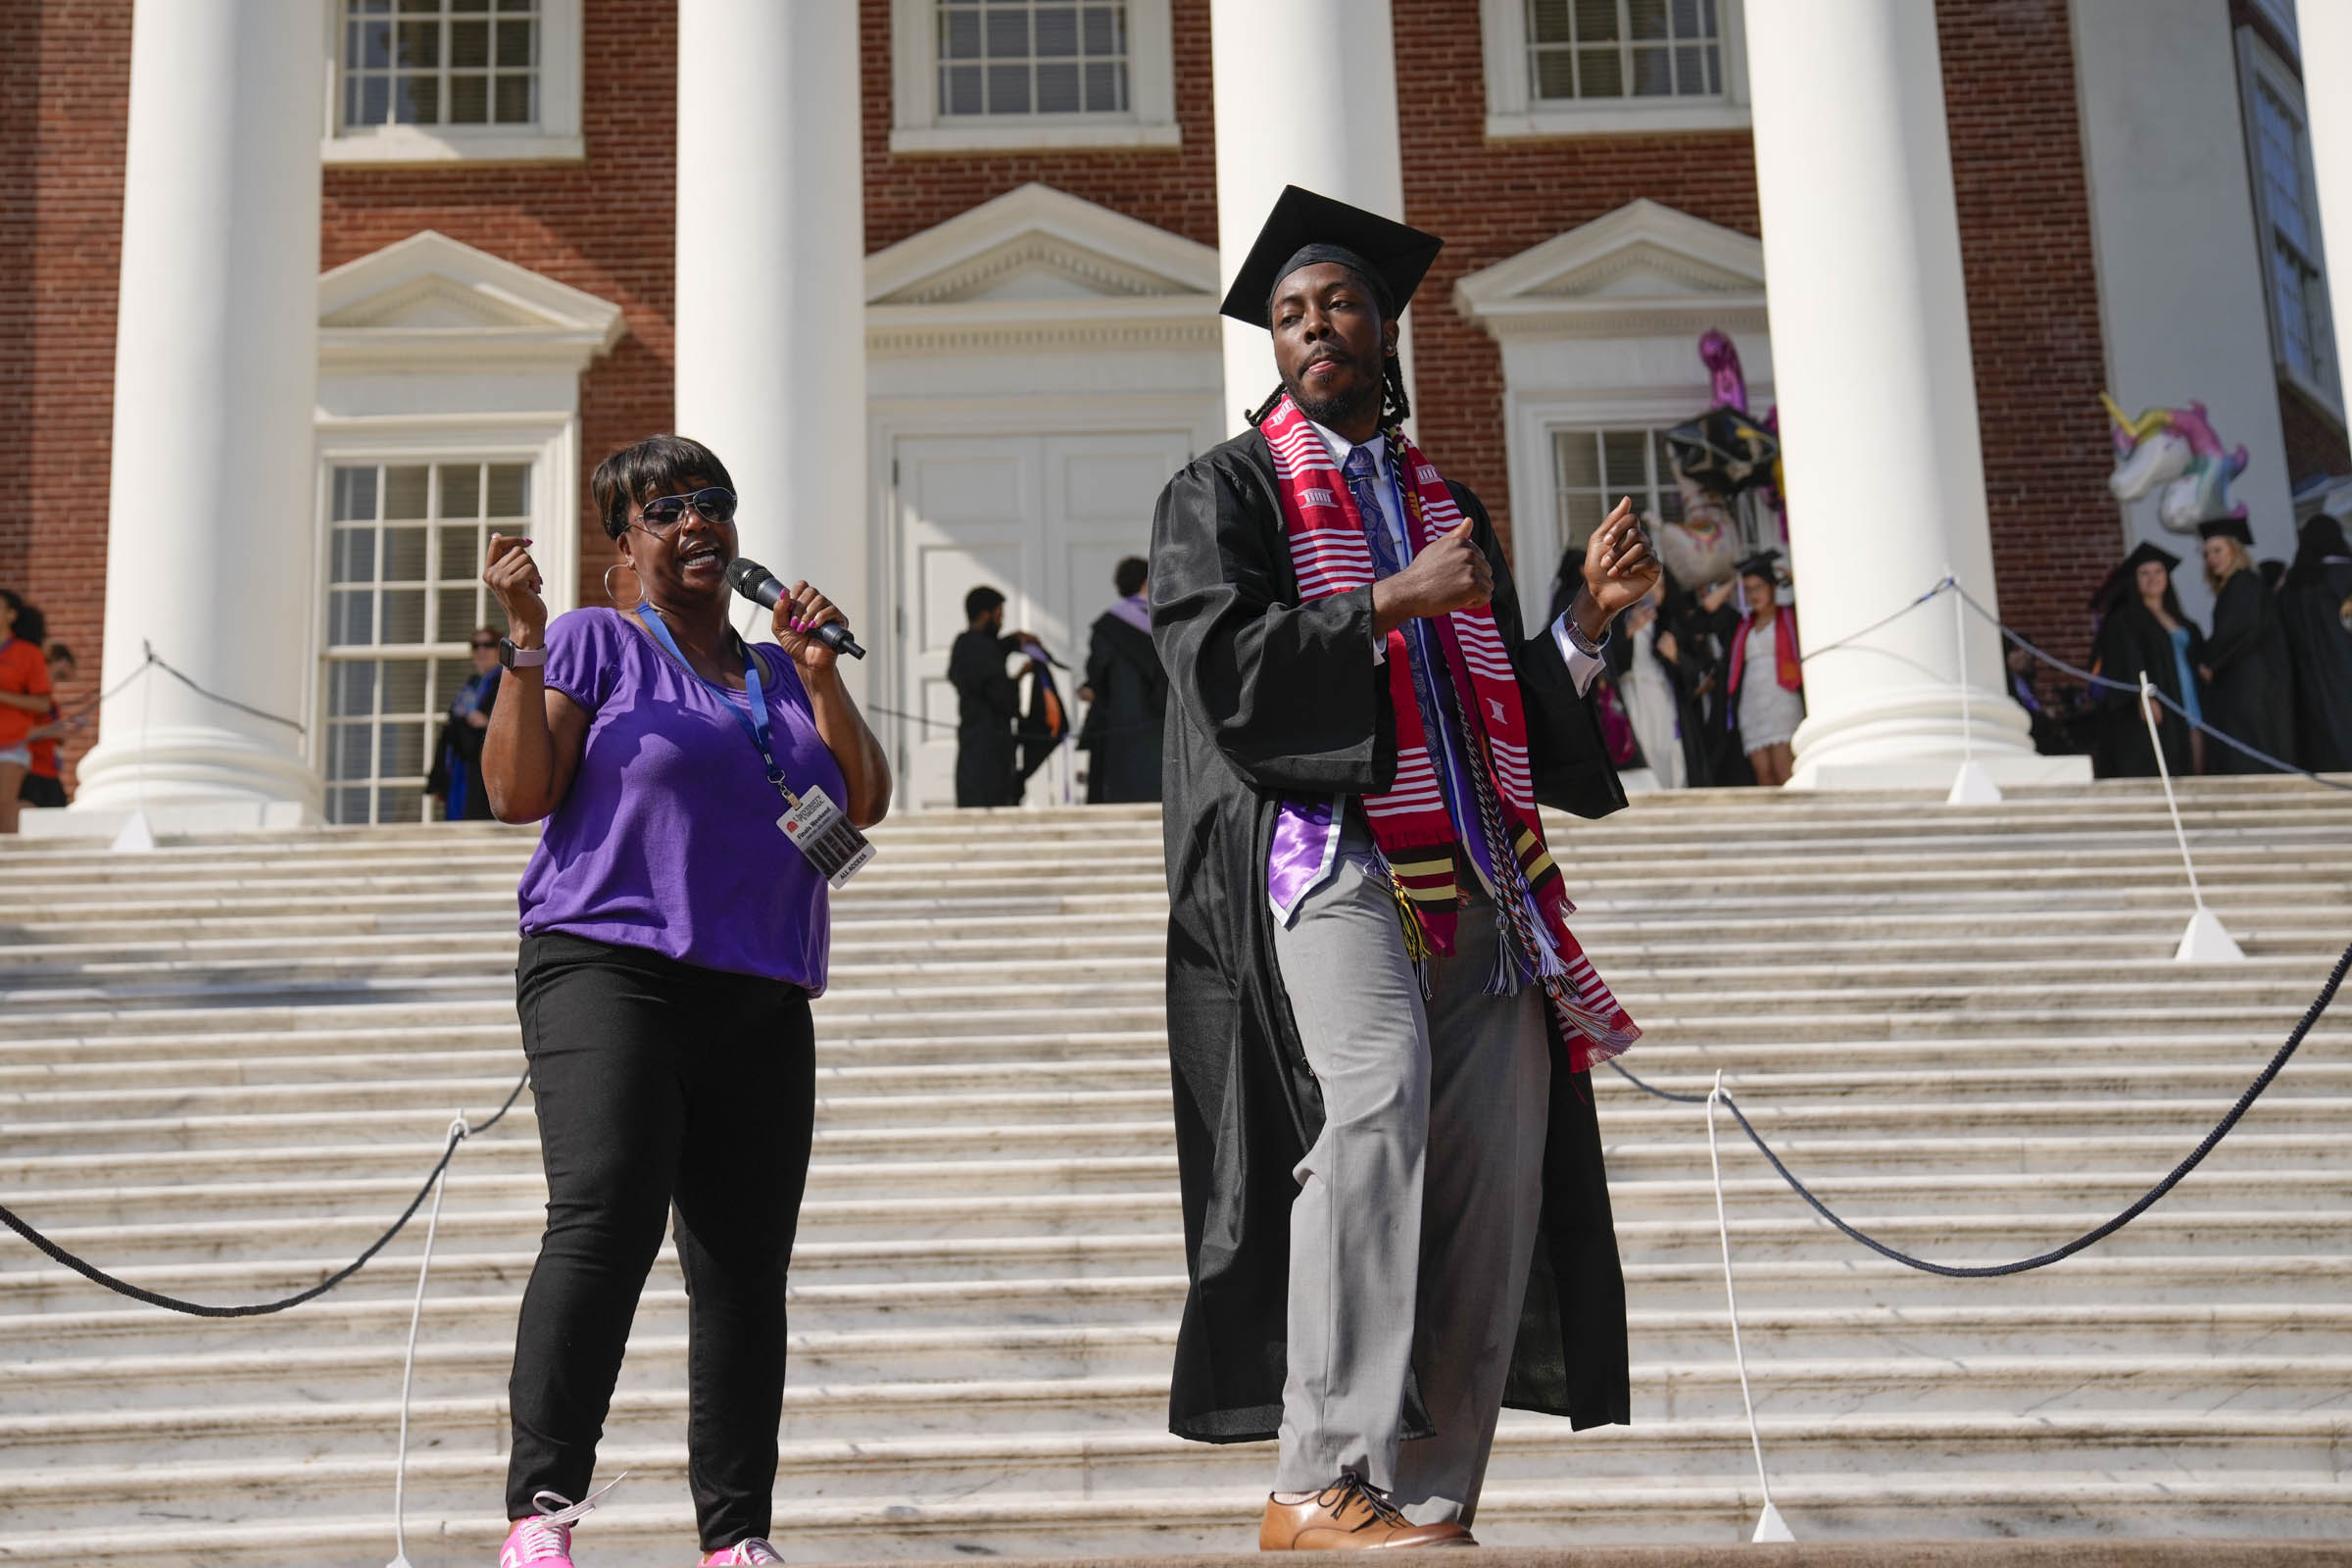 On the steps of the Rotunda, a woman sings into a microphone, while a graduating student dances along